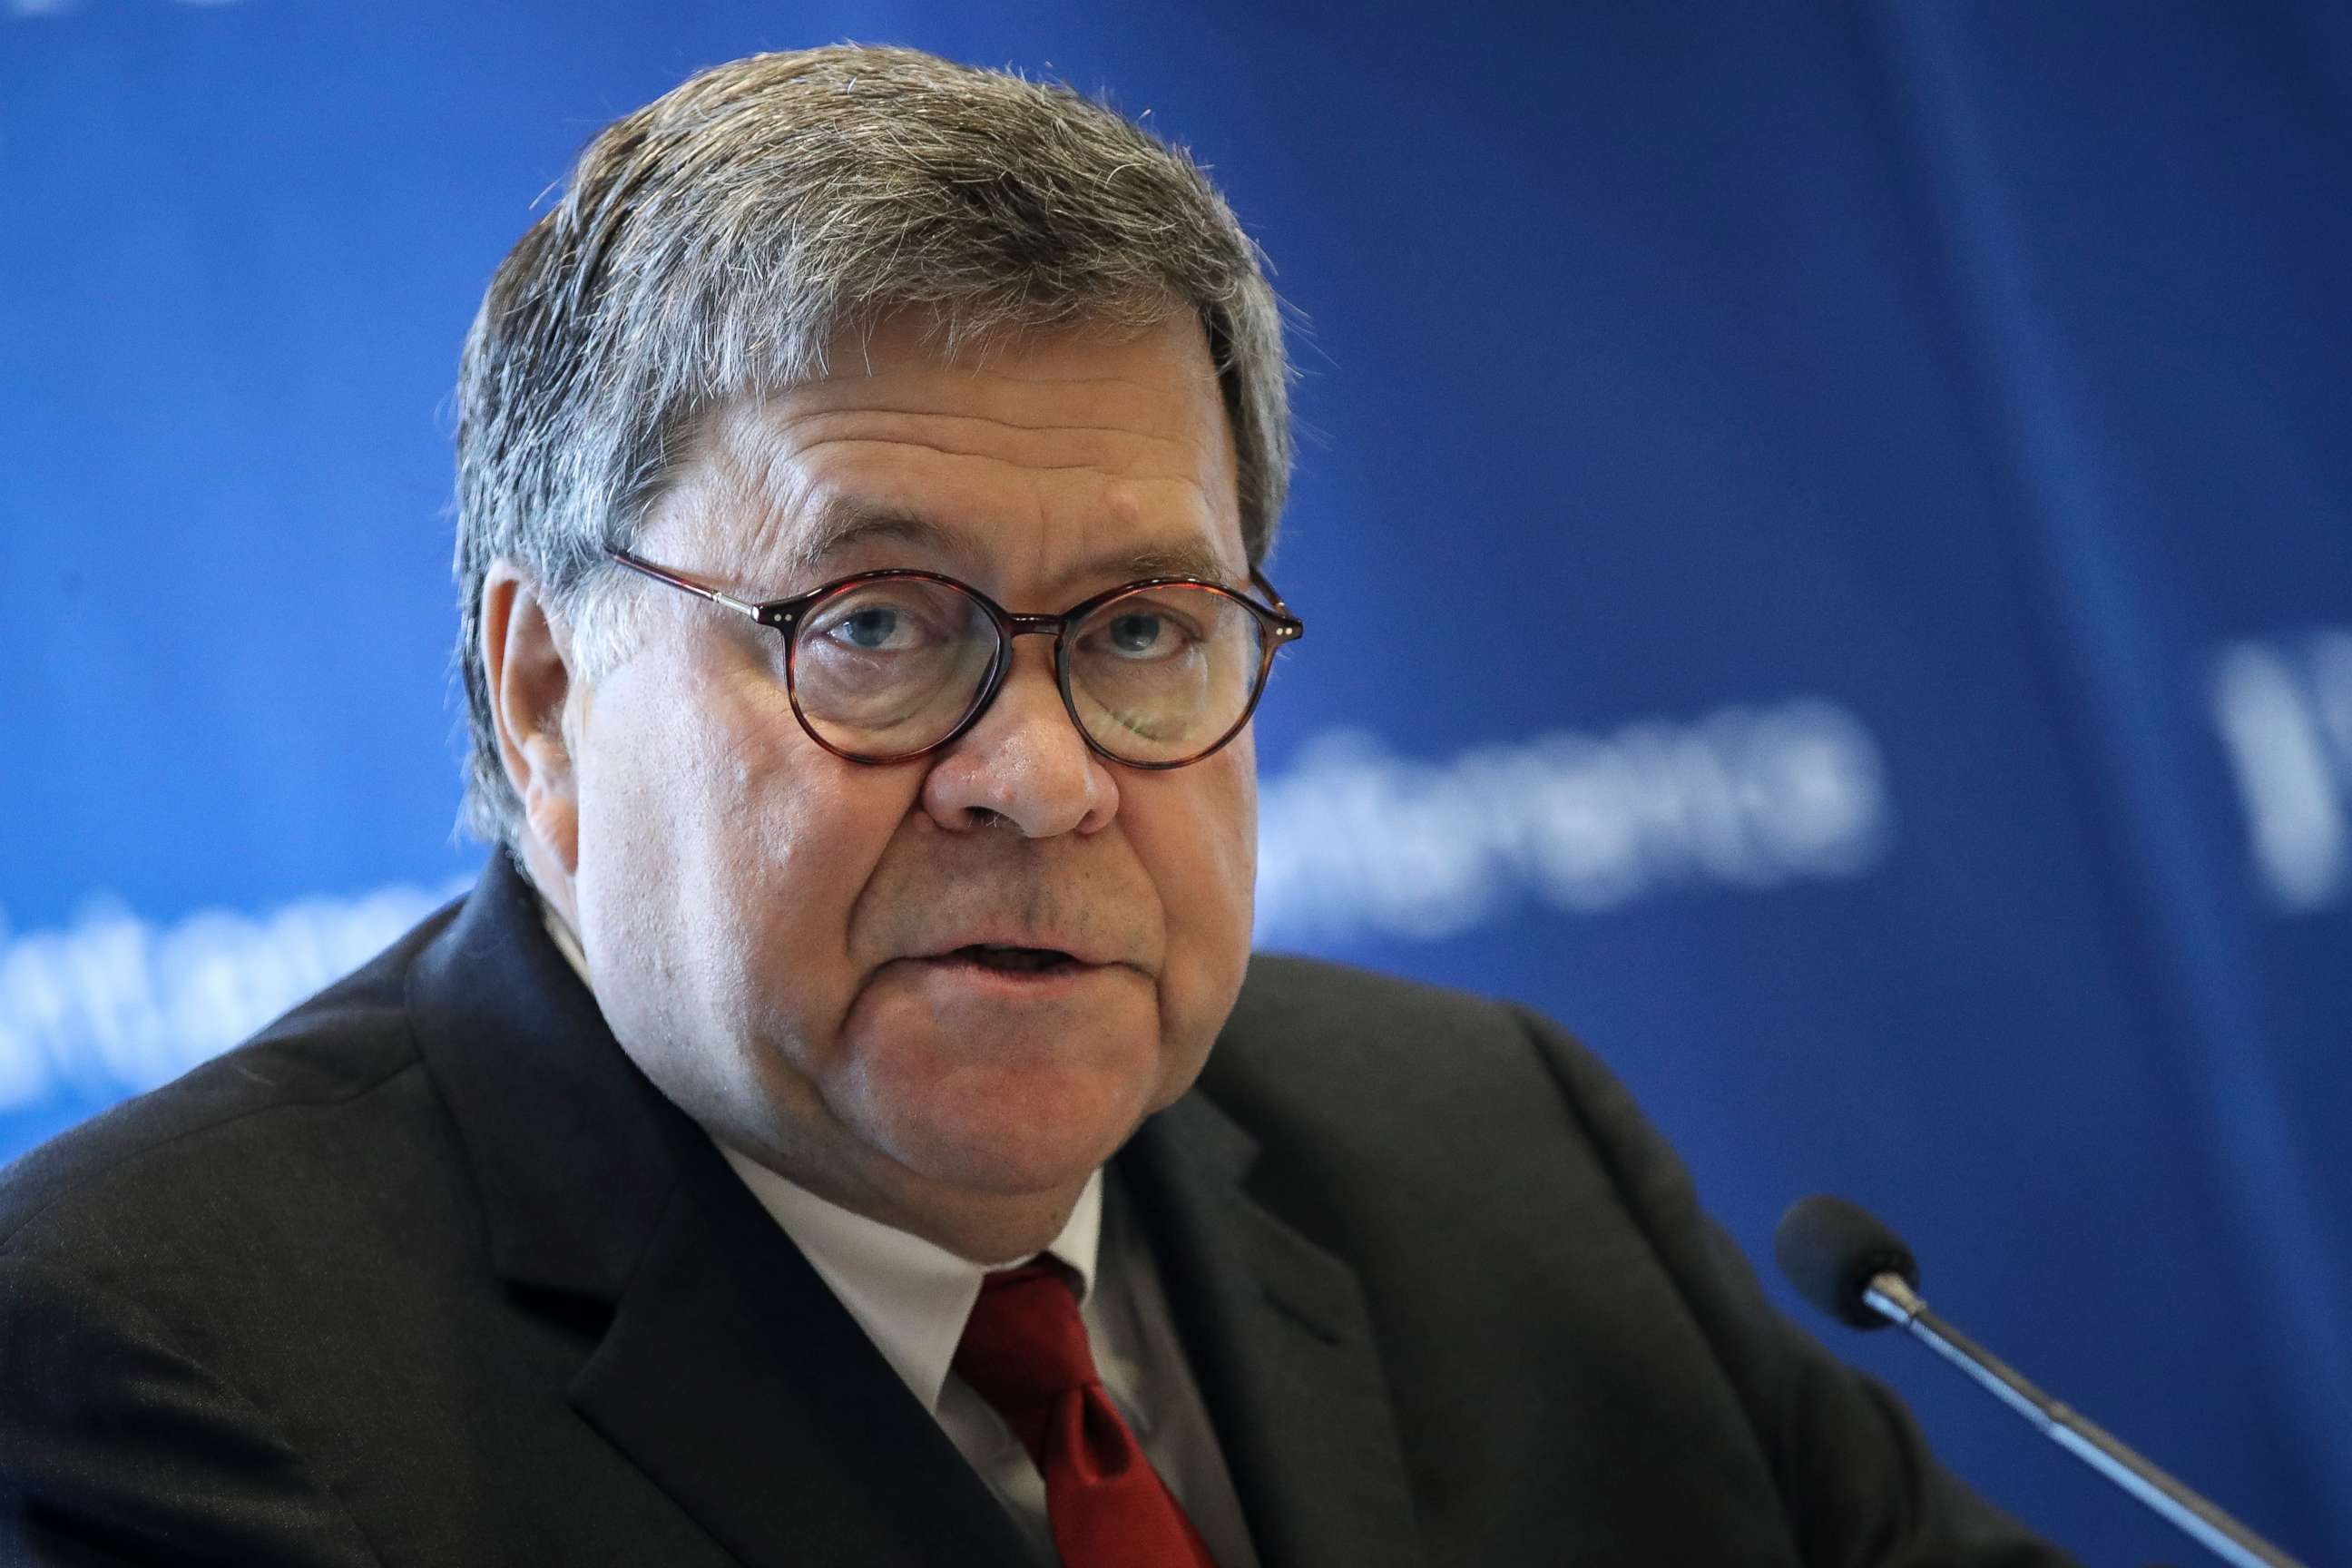 PHOTO: U.S. Attorney General William Barr speaks at the International Conference on Cyber Security at Fordham University School of Law on July 23, 2019 in New York City.